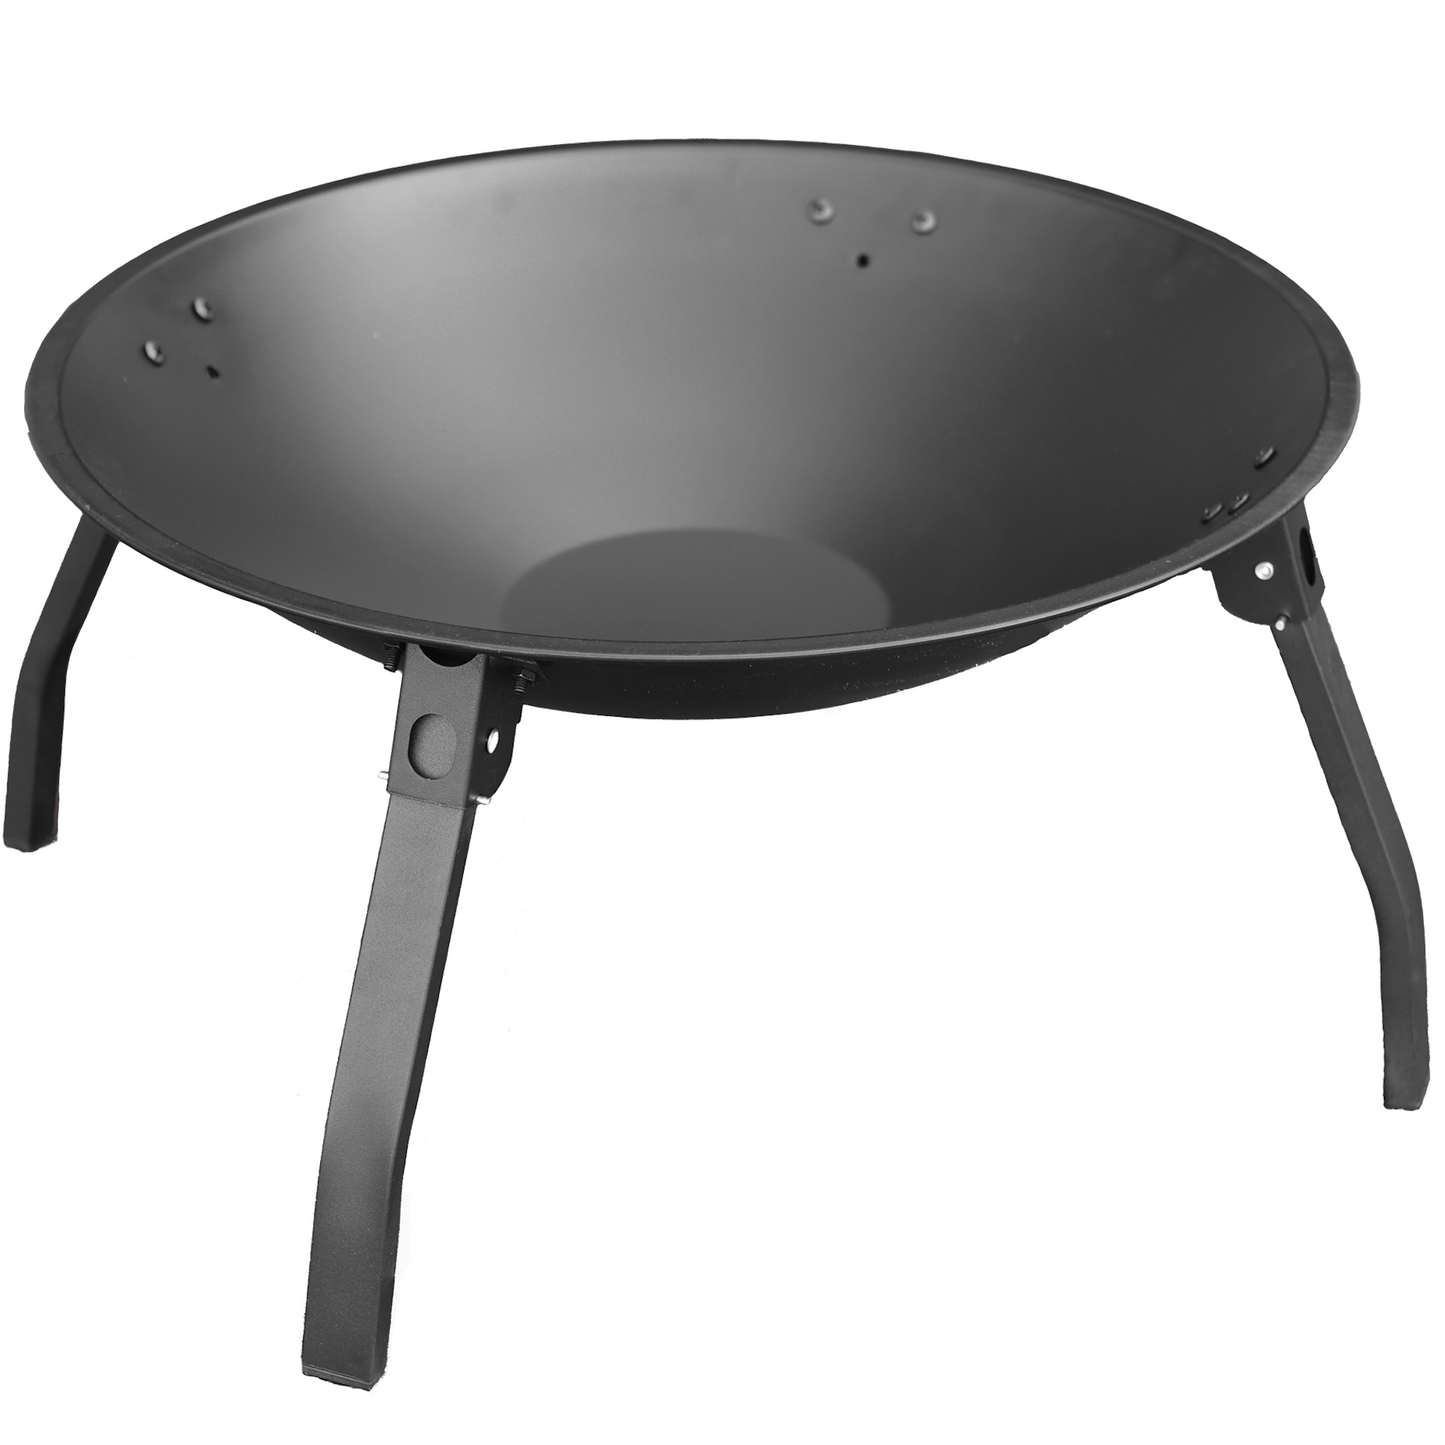 22" Round Fire Pit With Cover For Outdoor Wood Burning On Deck, Patio, Grass, and Concrete